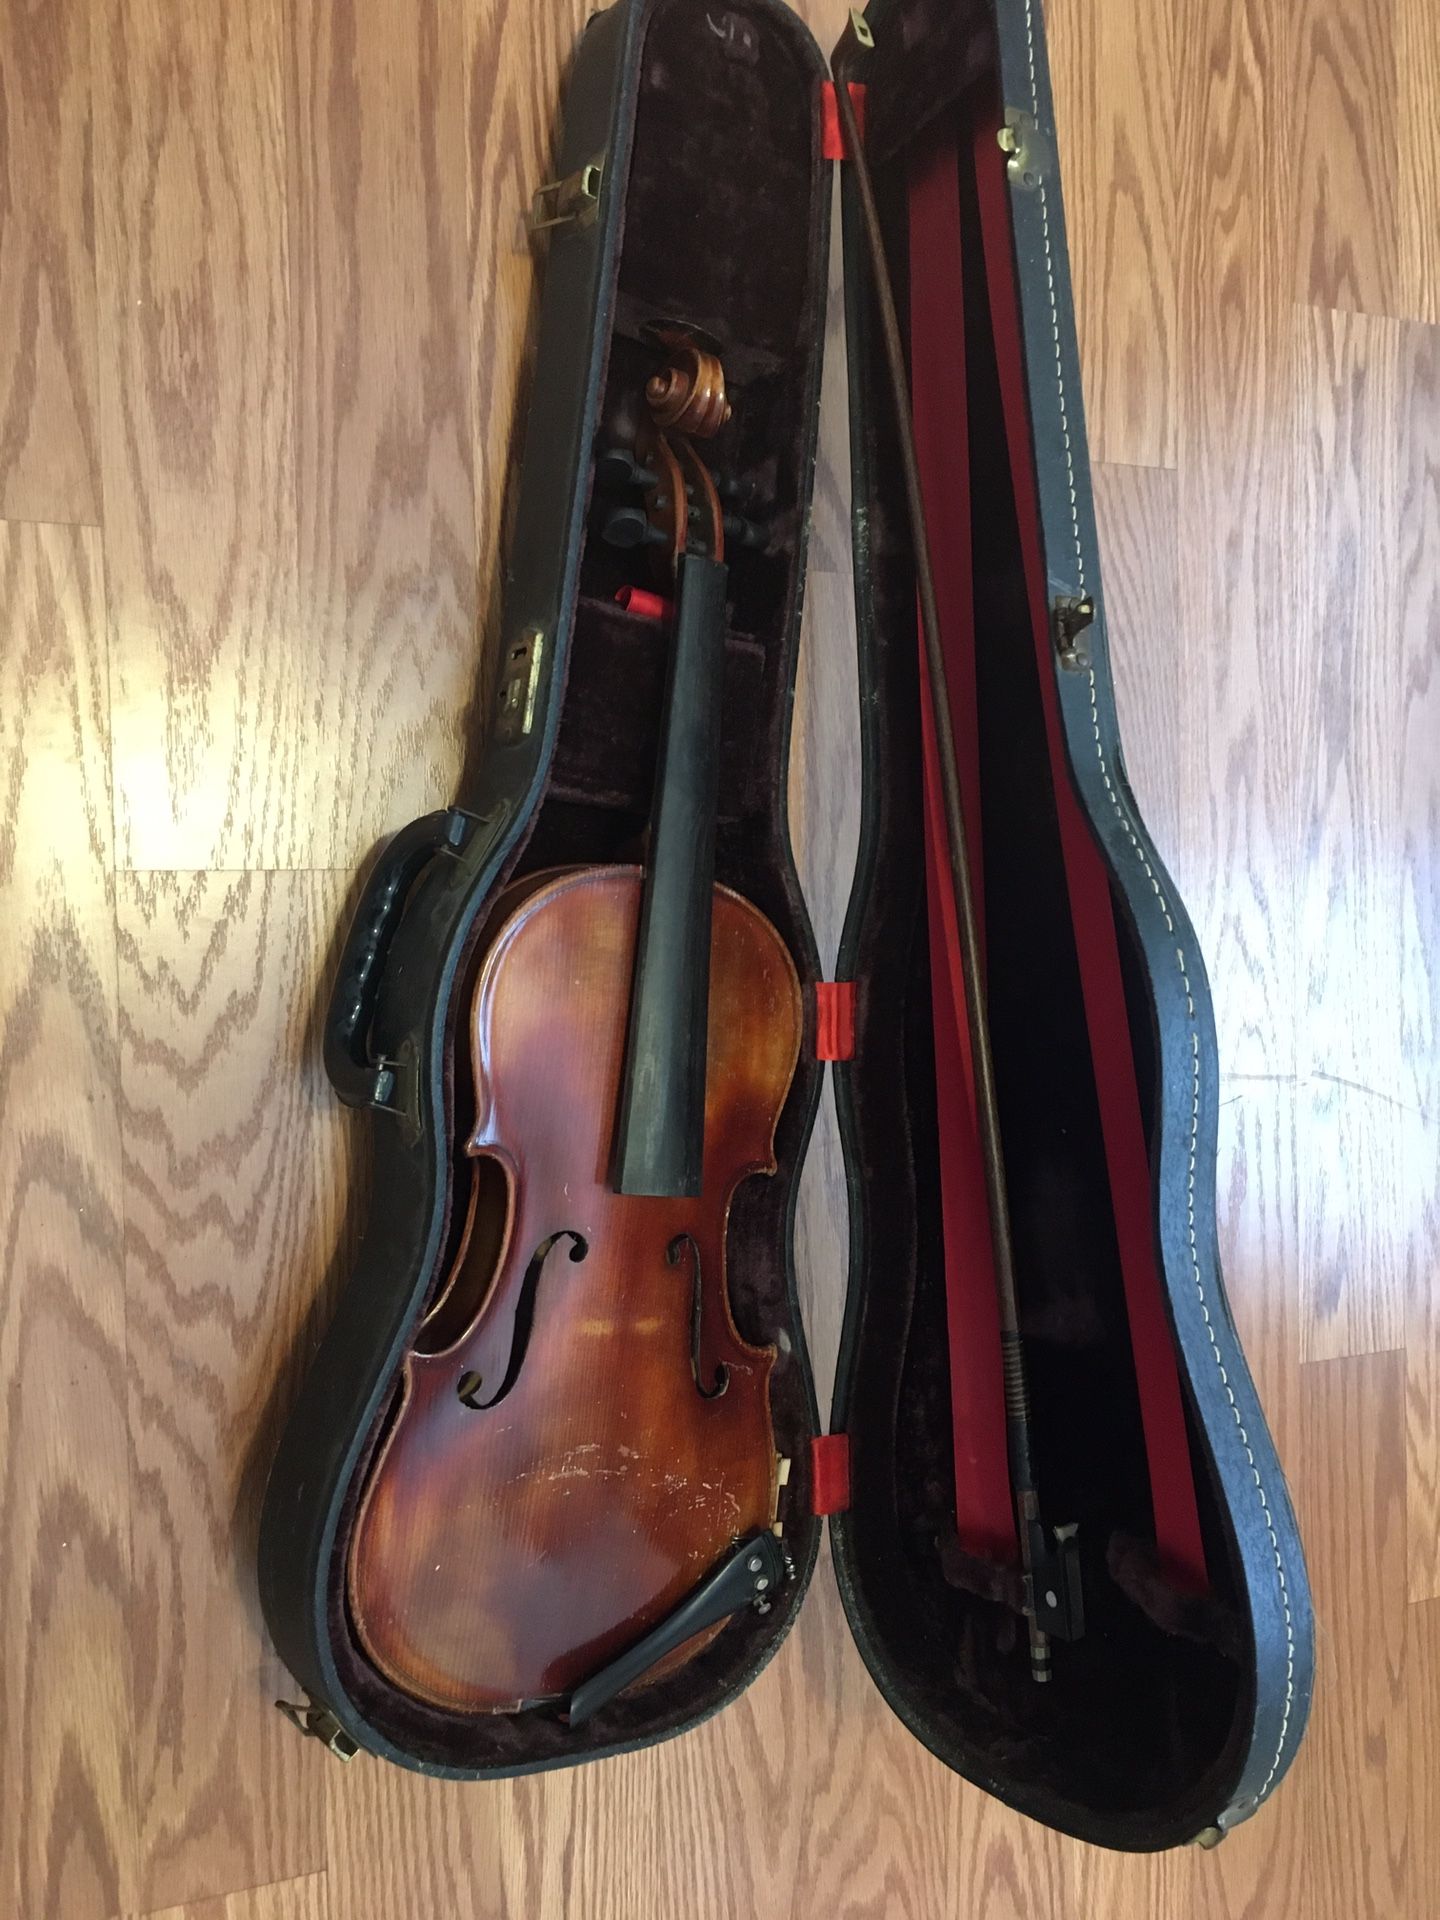 Copy of Franz Joseph Pfretschner violin, 3/4 size, made in Germany, with case